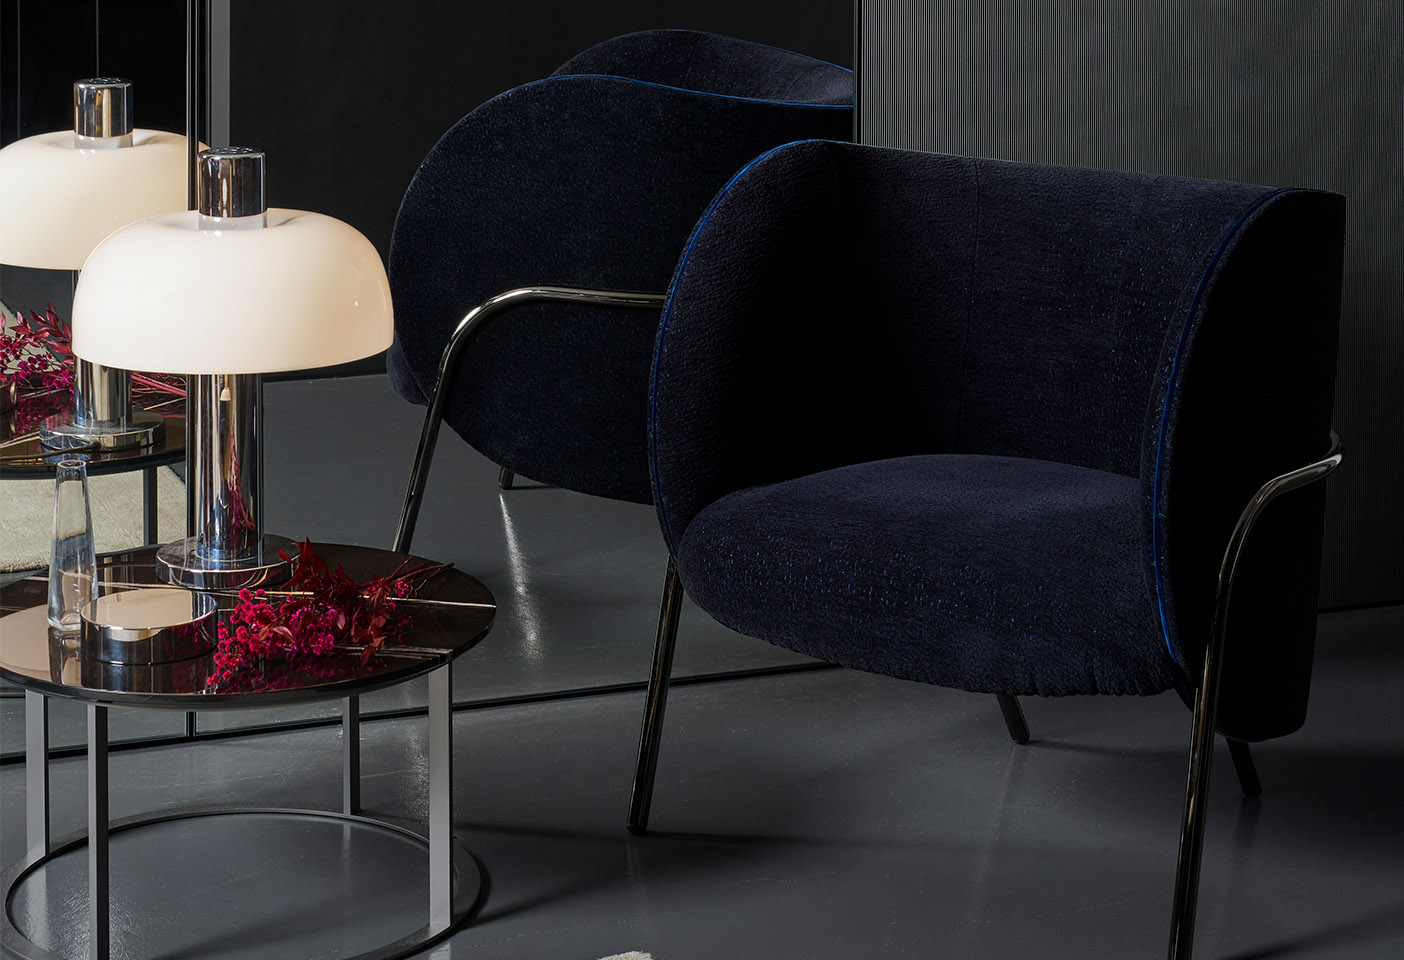 The Royce Armchair designed by Metrica. Photo c/o SP01.